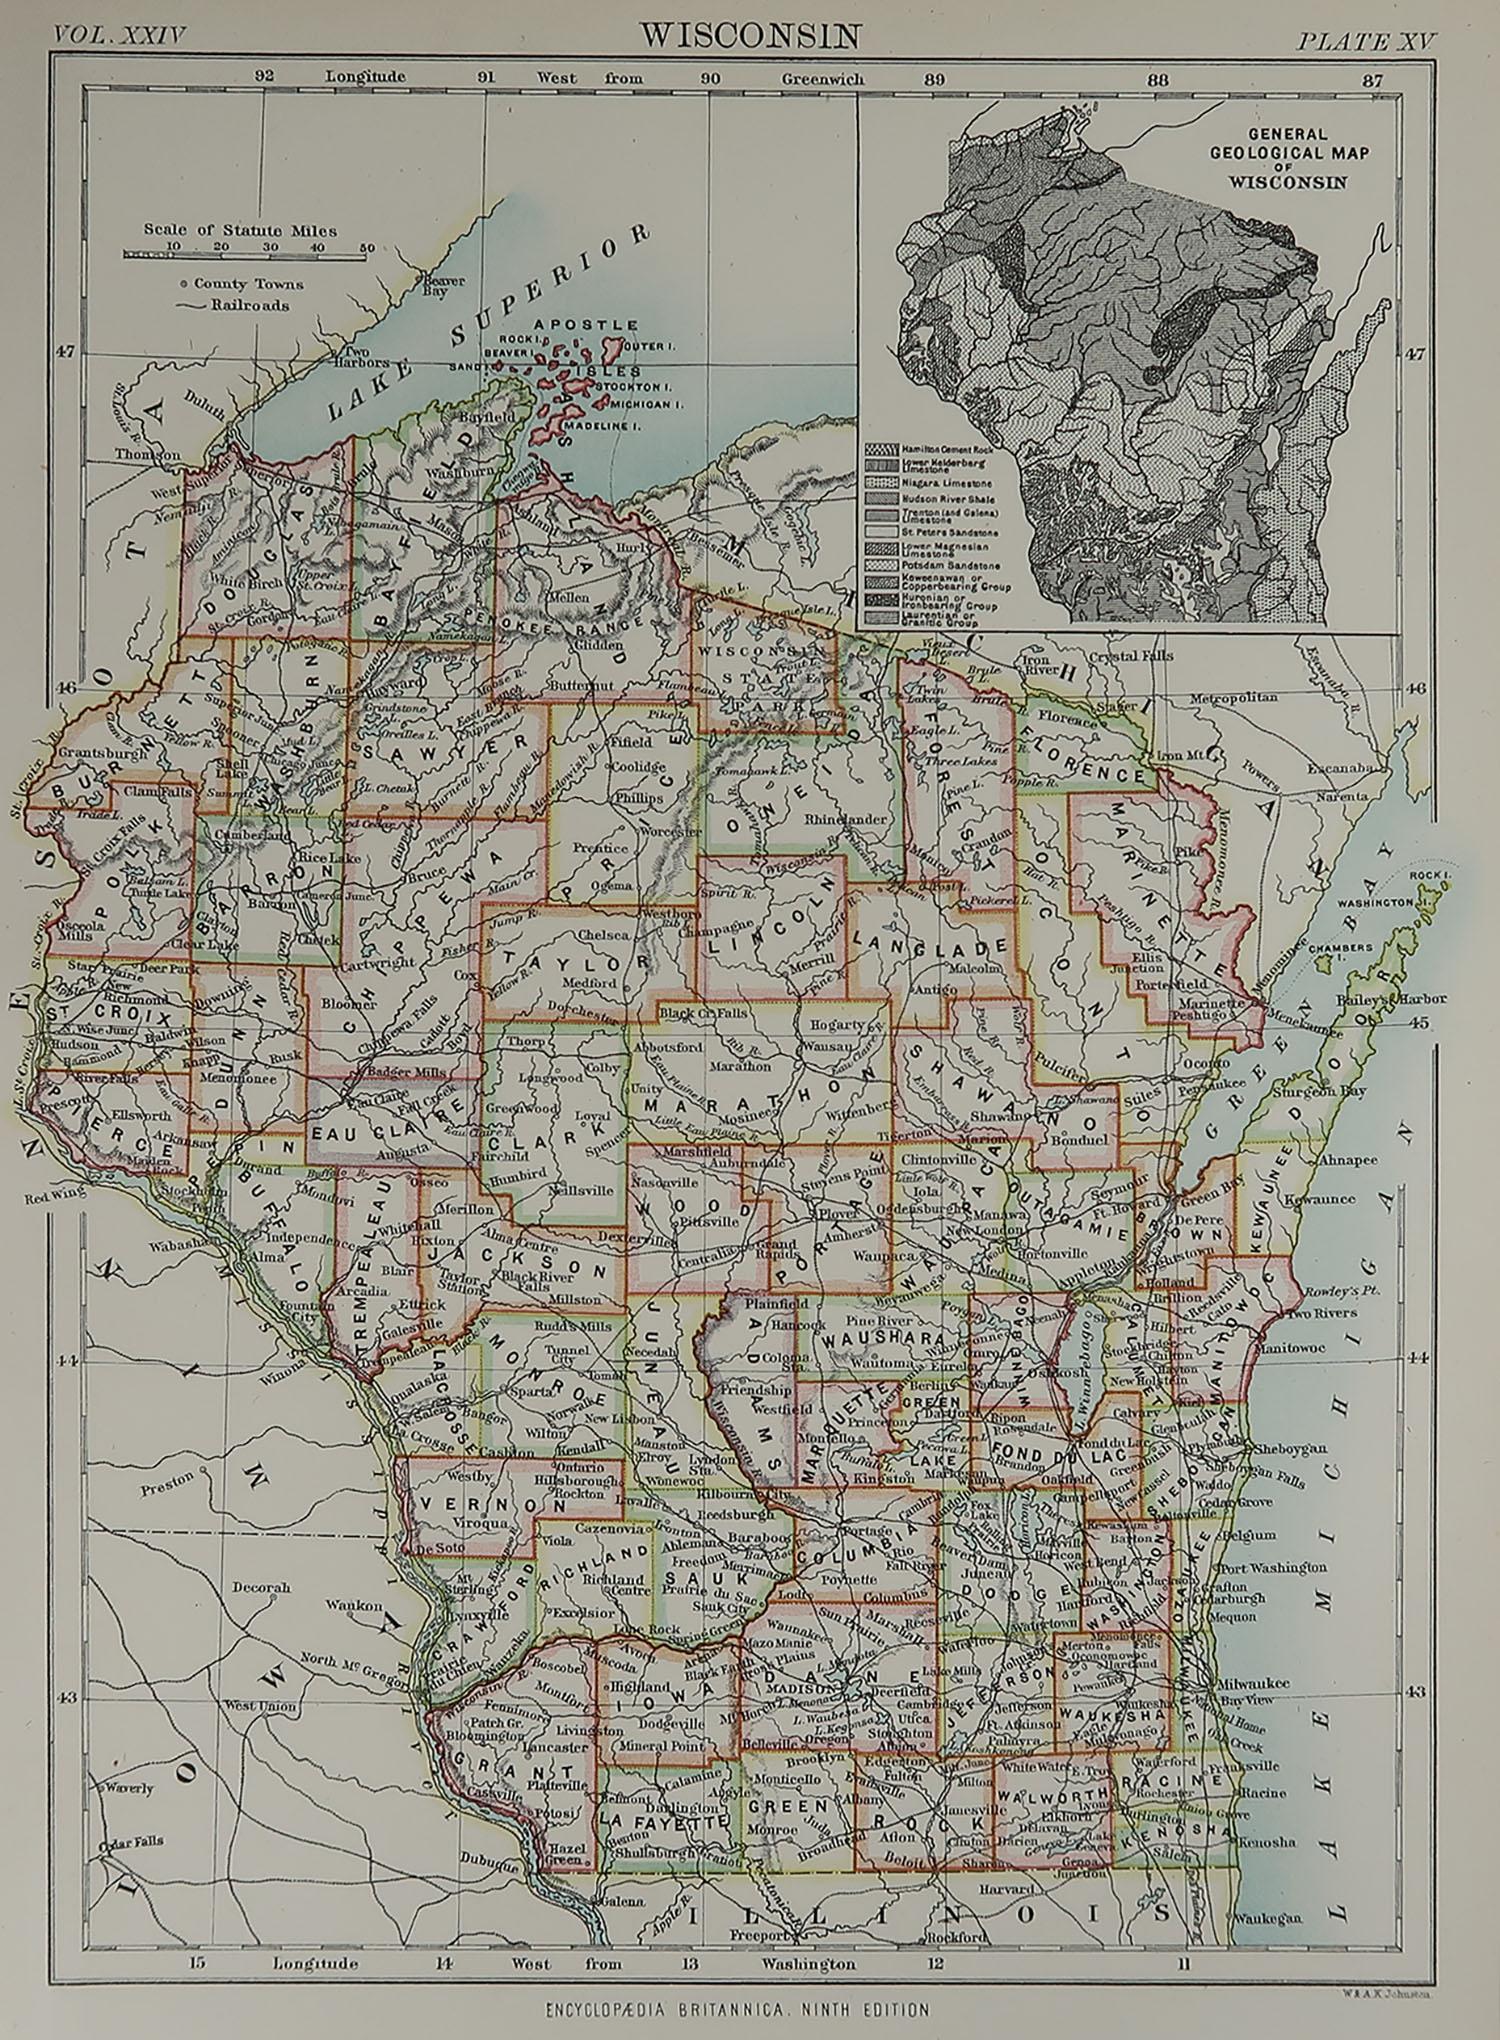 Great map of Wisconsin

Drawn and Engraved by W. & A.K. Johnston

Published By A & C Black, Edinburgh.

Original colour

Unframed.








 